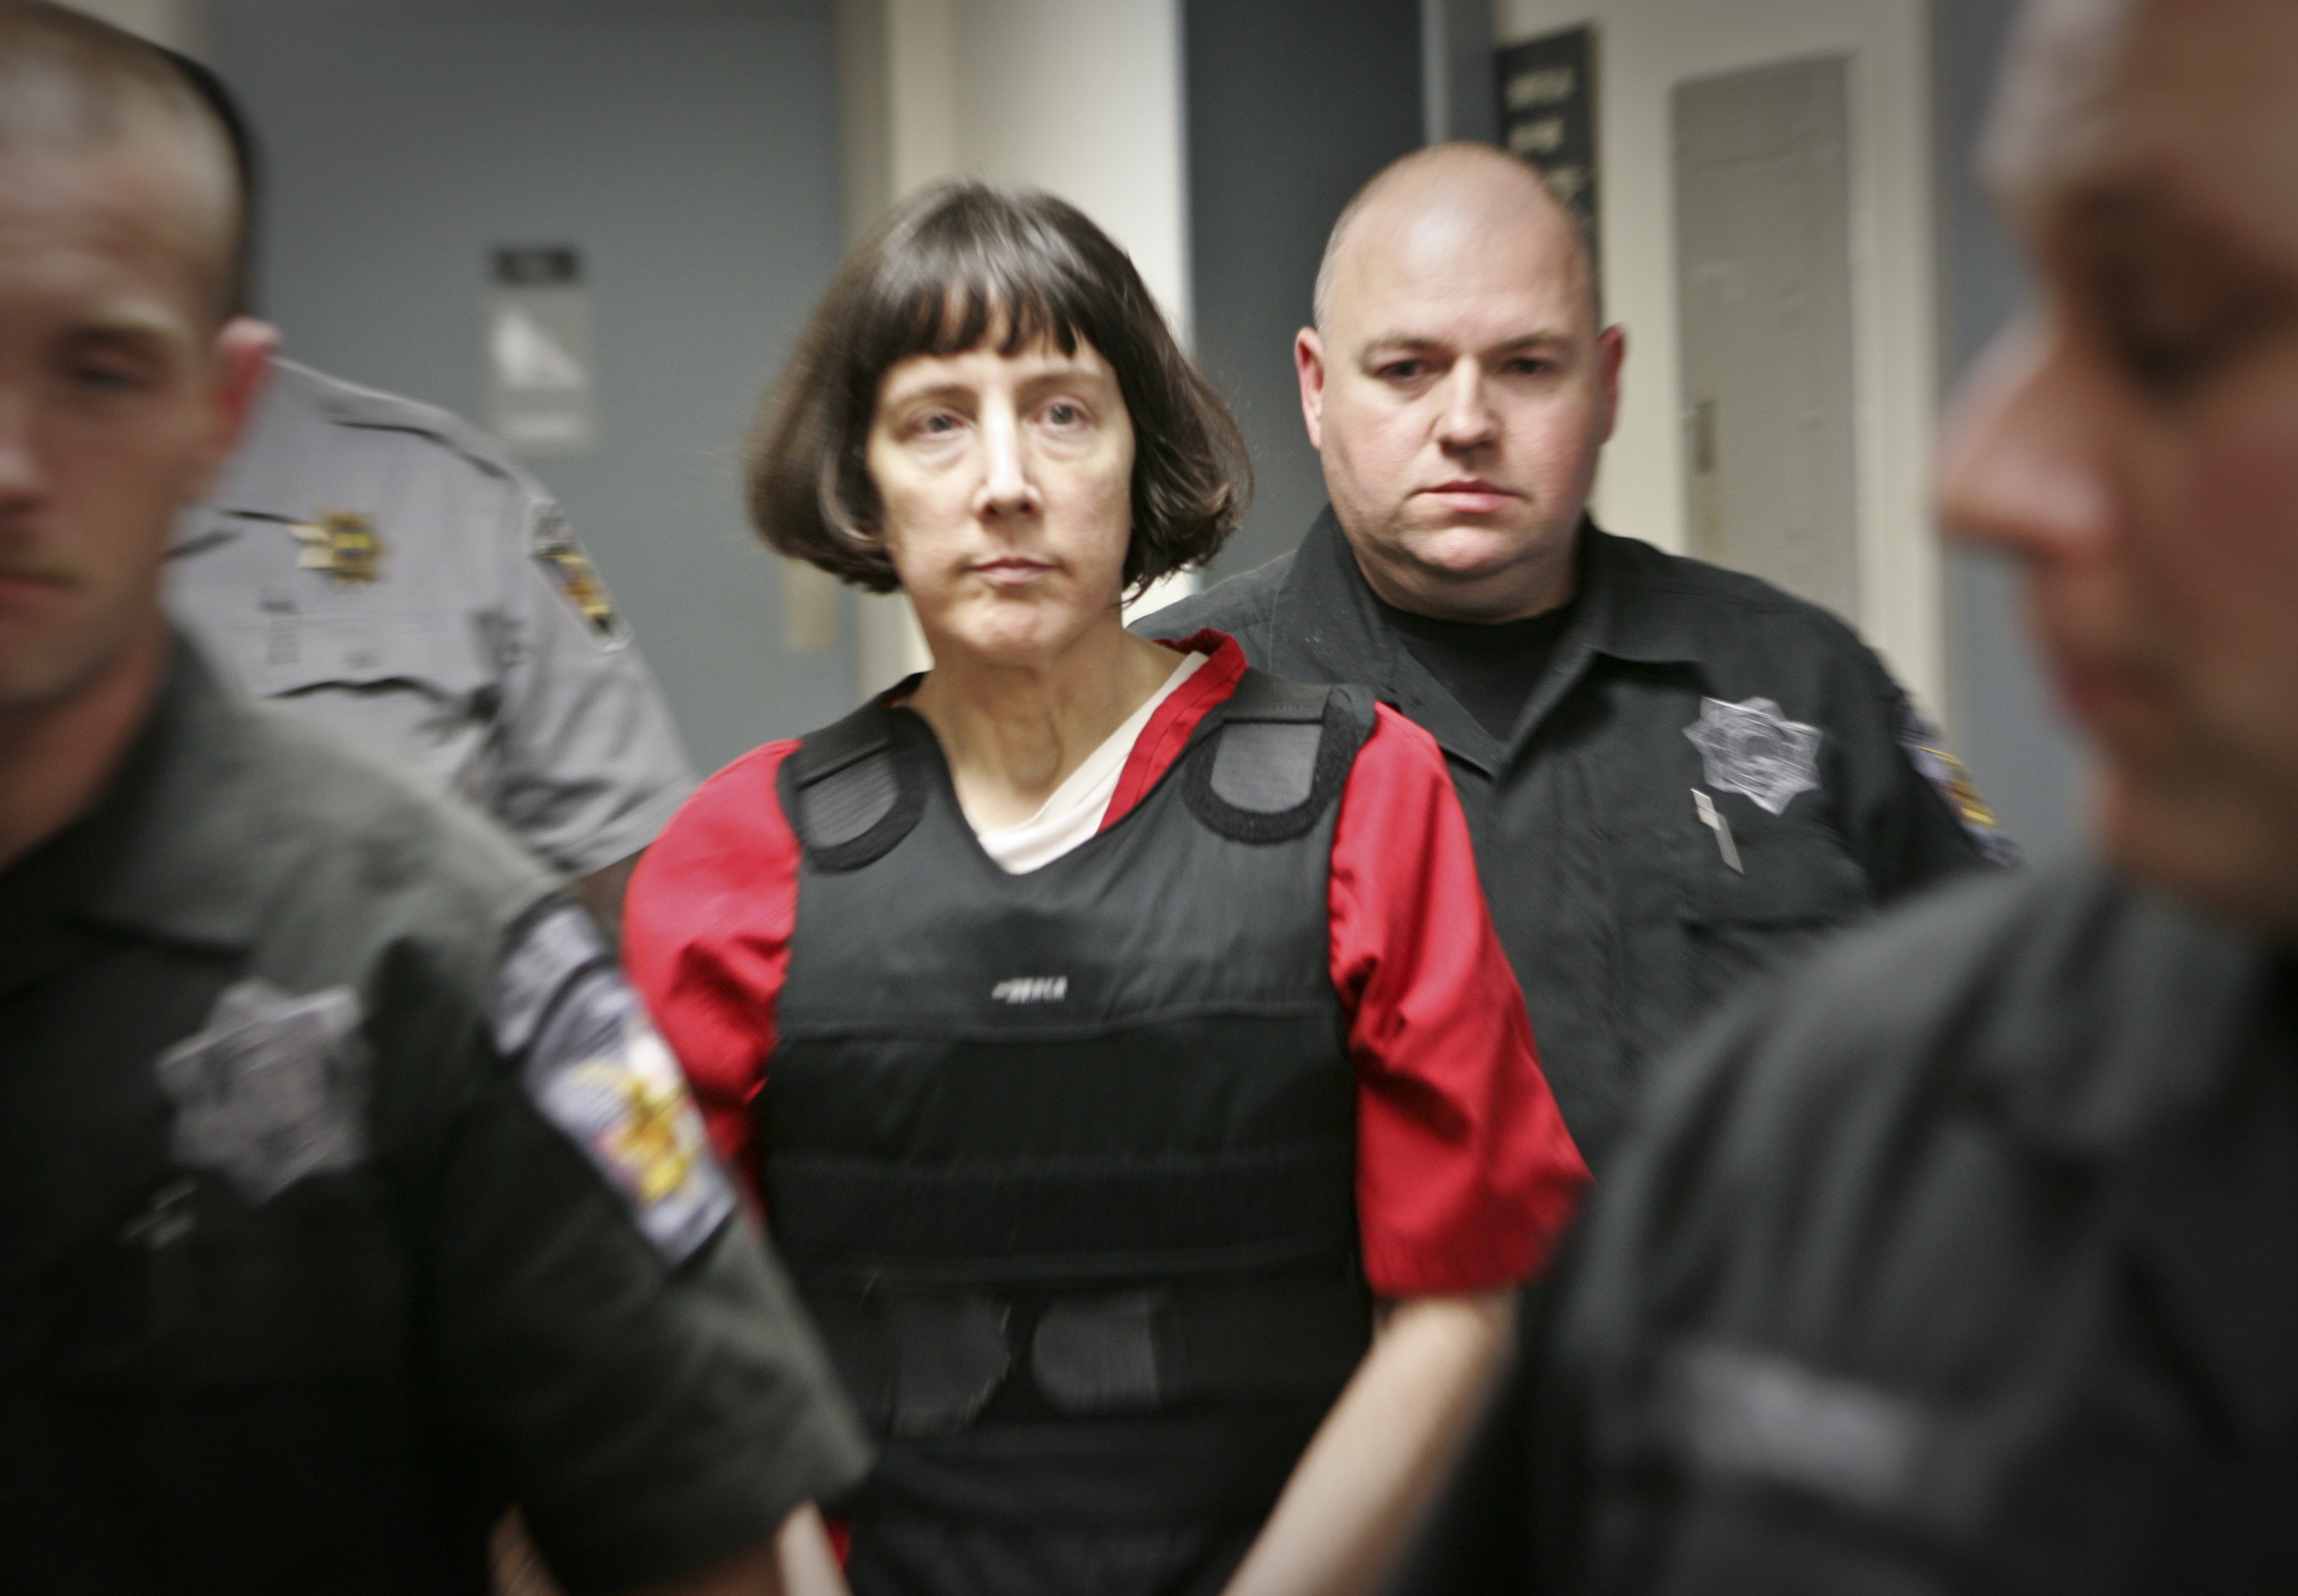 Amy Bishop is escorted by sheriff's deputies at the Madison County Courthouse in Hunstville, Ala., Tuesday, Sept. 11, 2012 (Michael Mercier—AP)